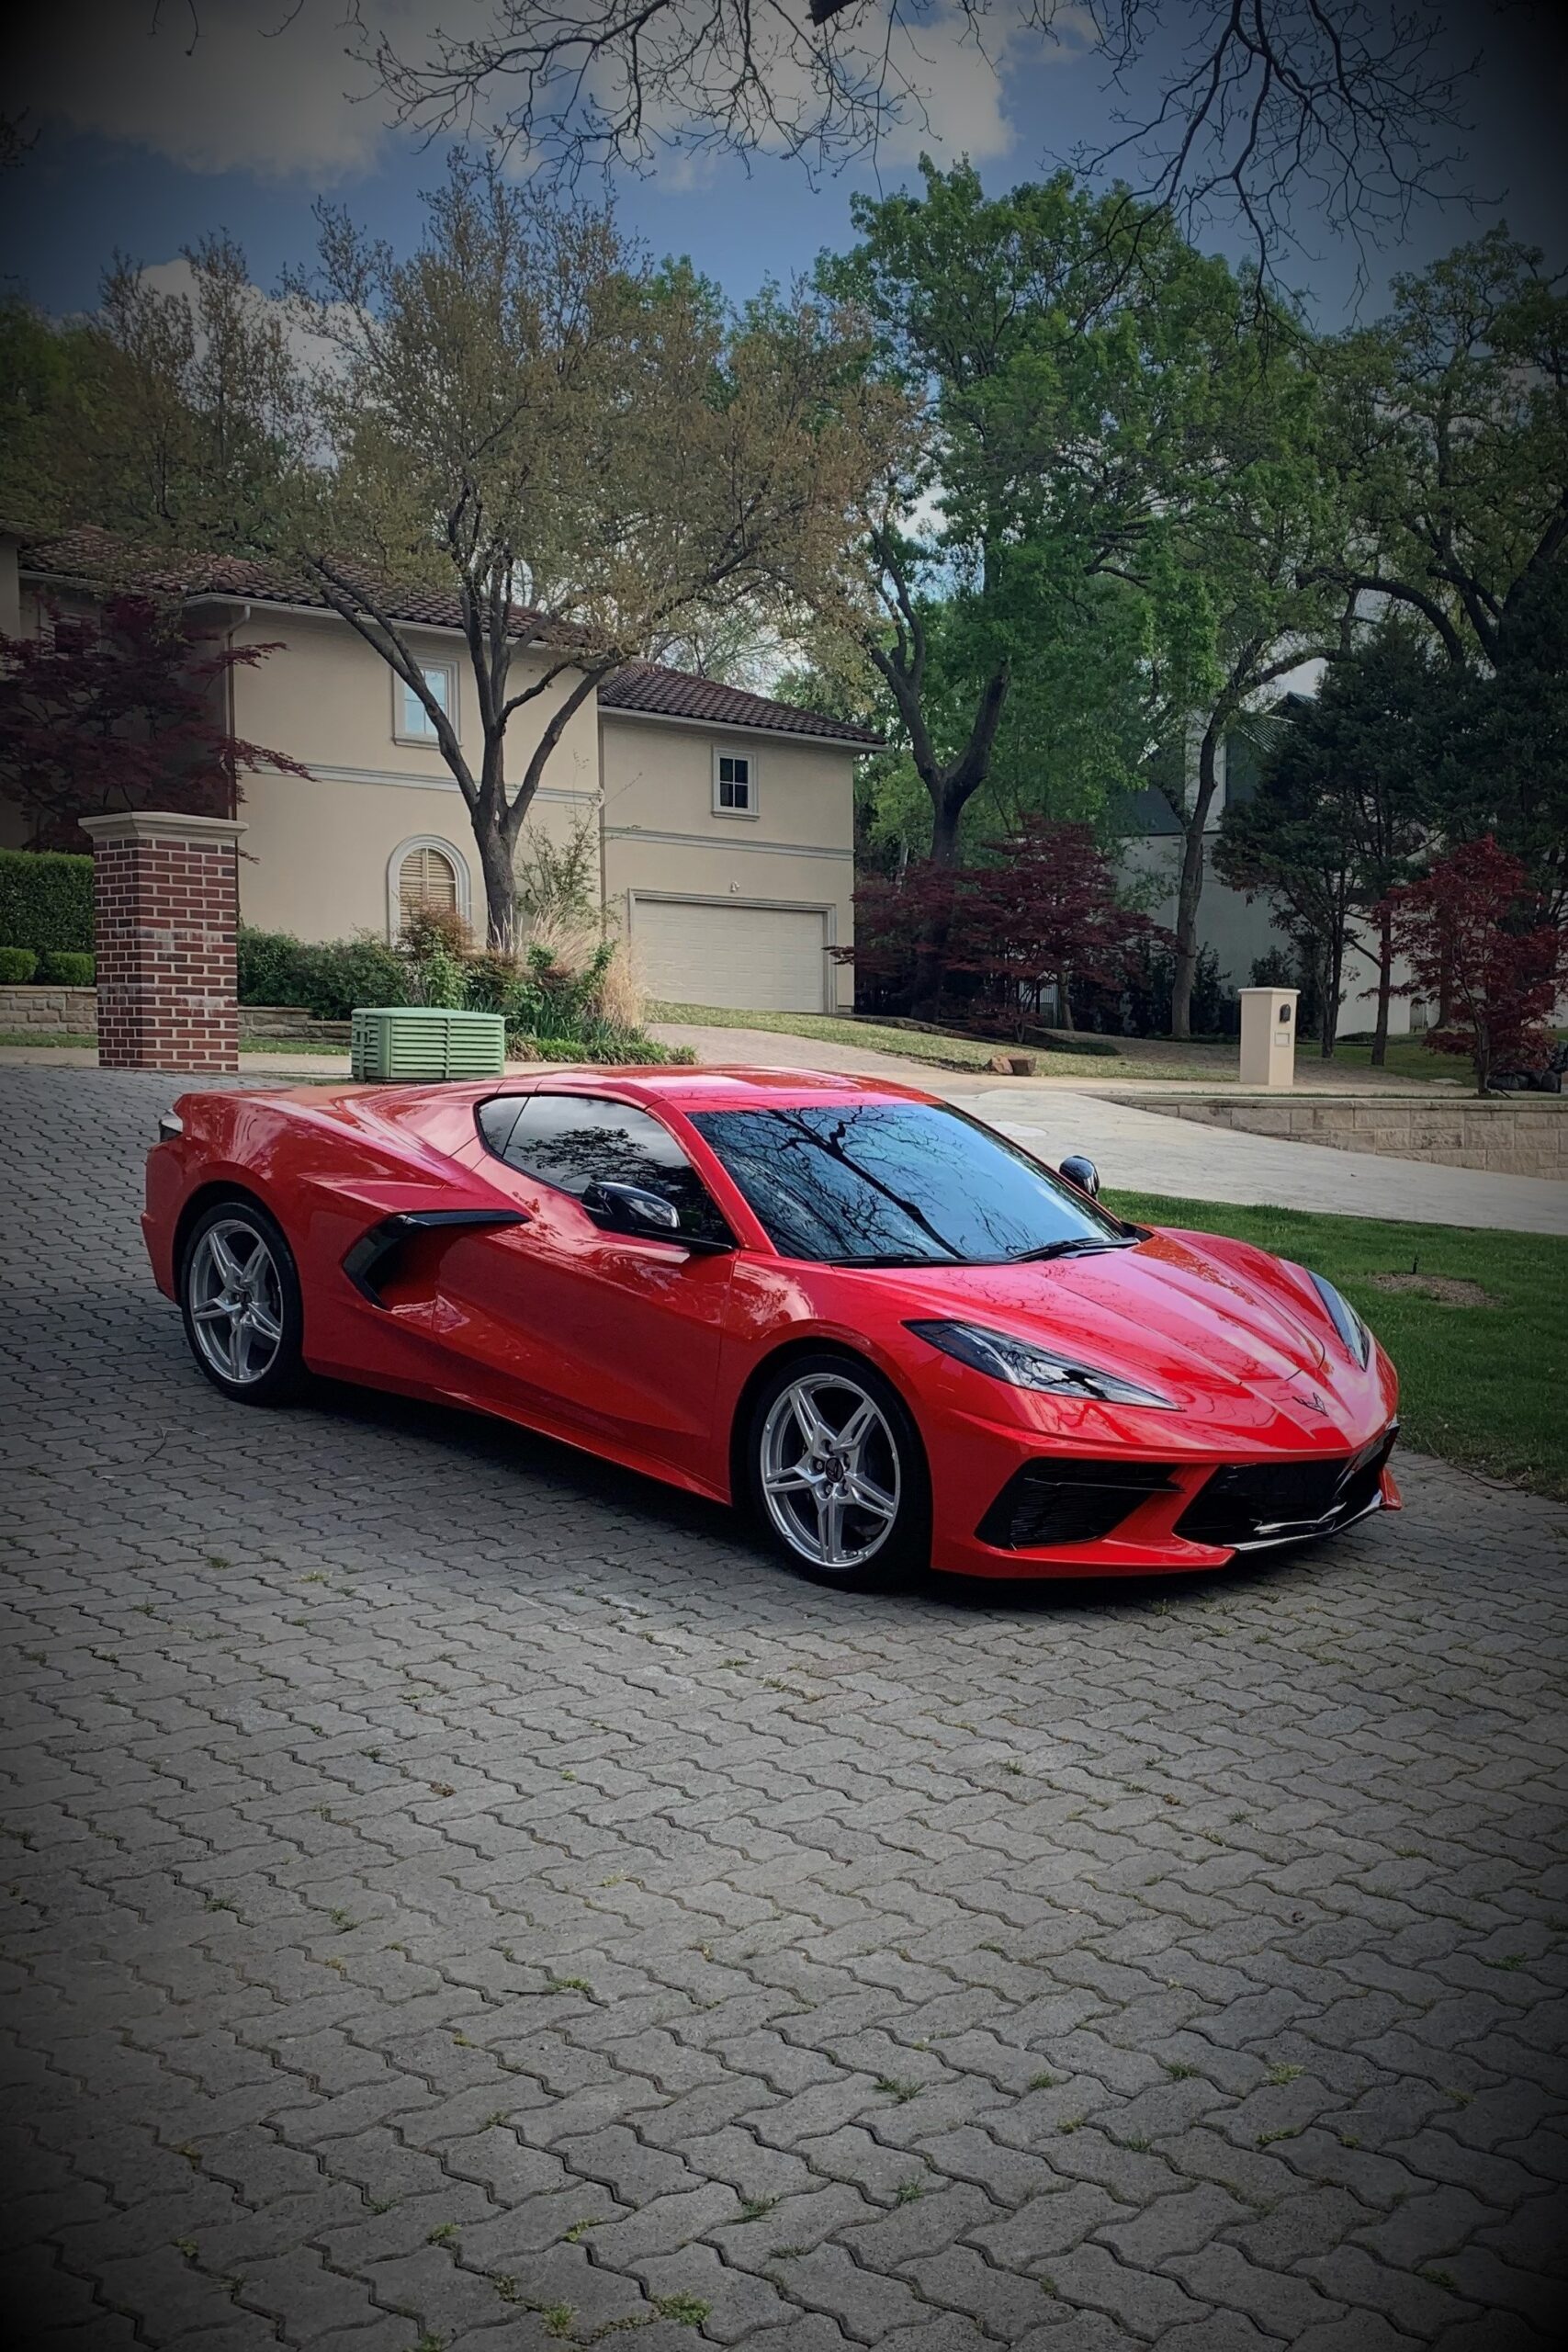 Photo on Free Retirement Planning page showing sports car from story